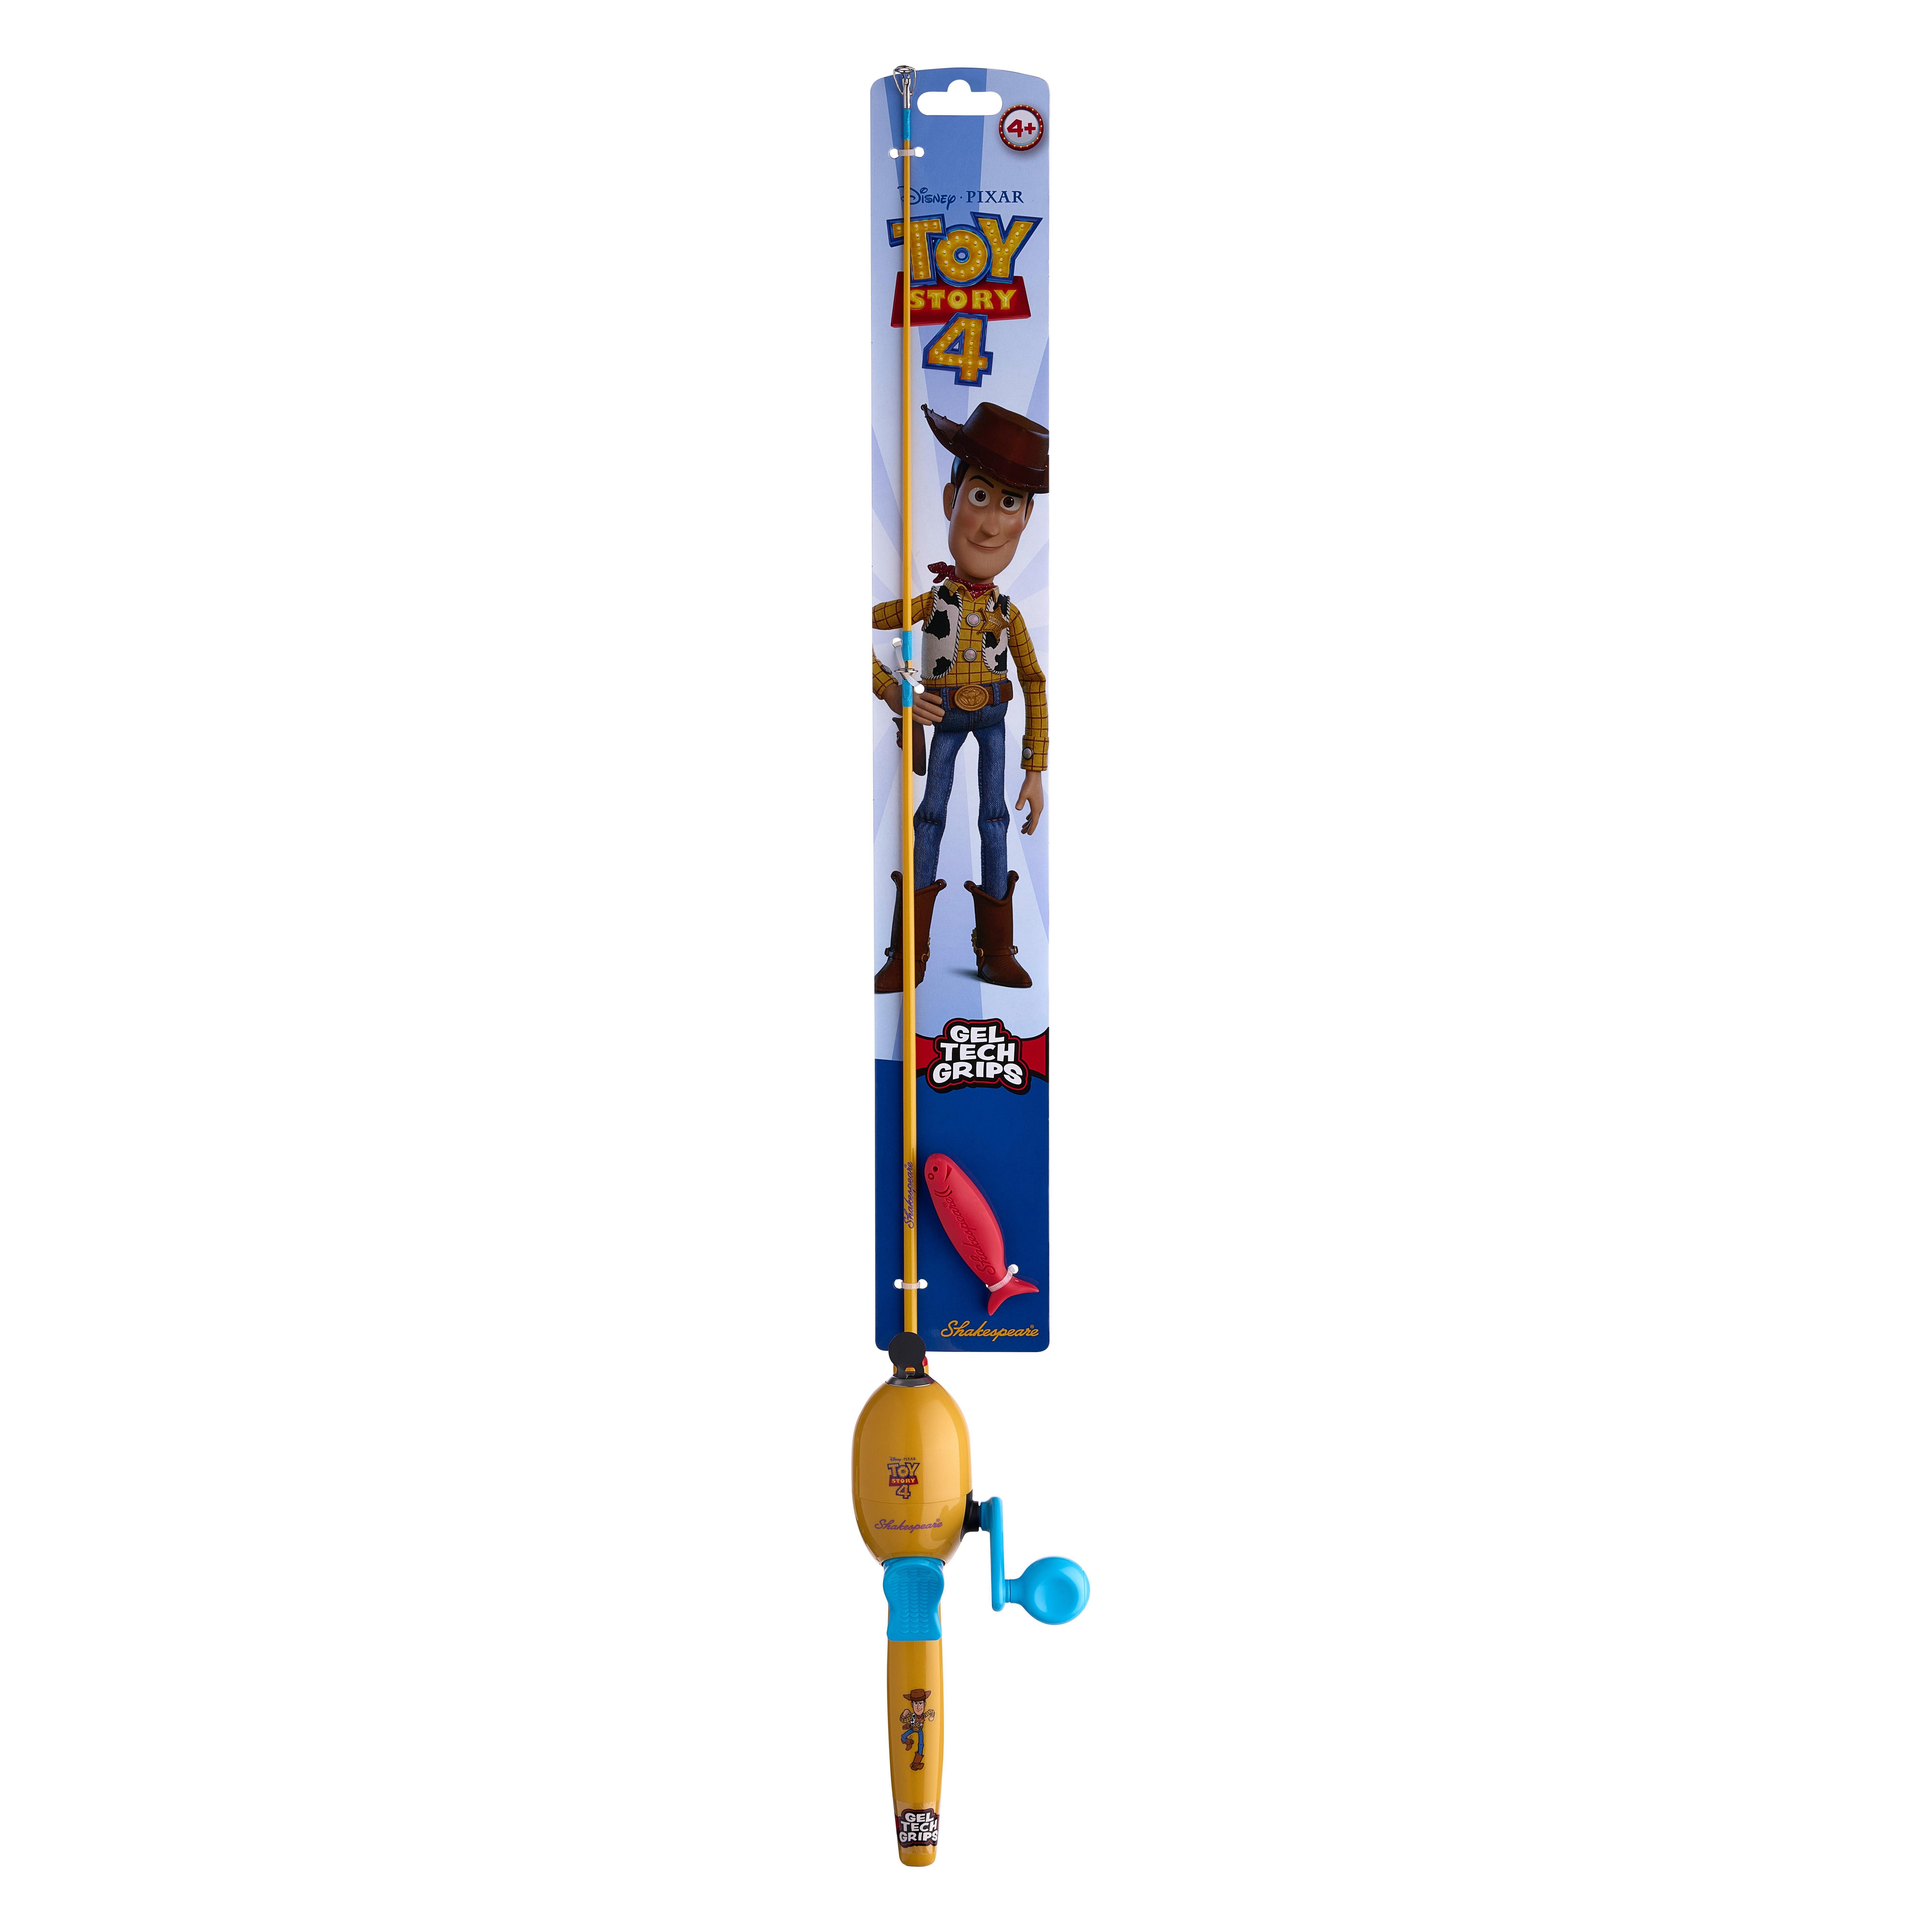 Shakespear Disney Pixar Toy Story 4 Fishing Pole 2ft 6in All In One Fishing